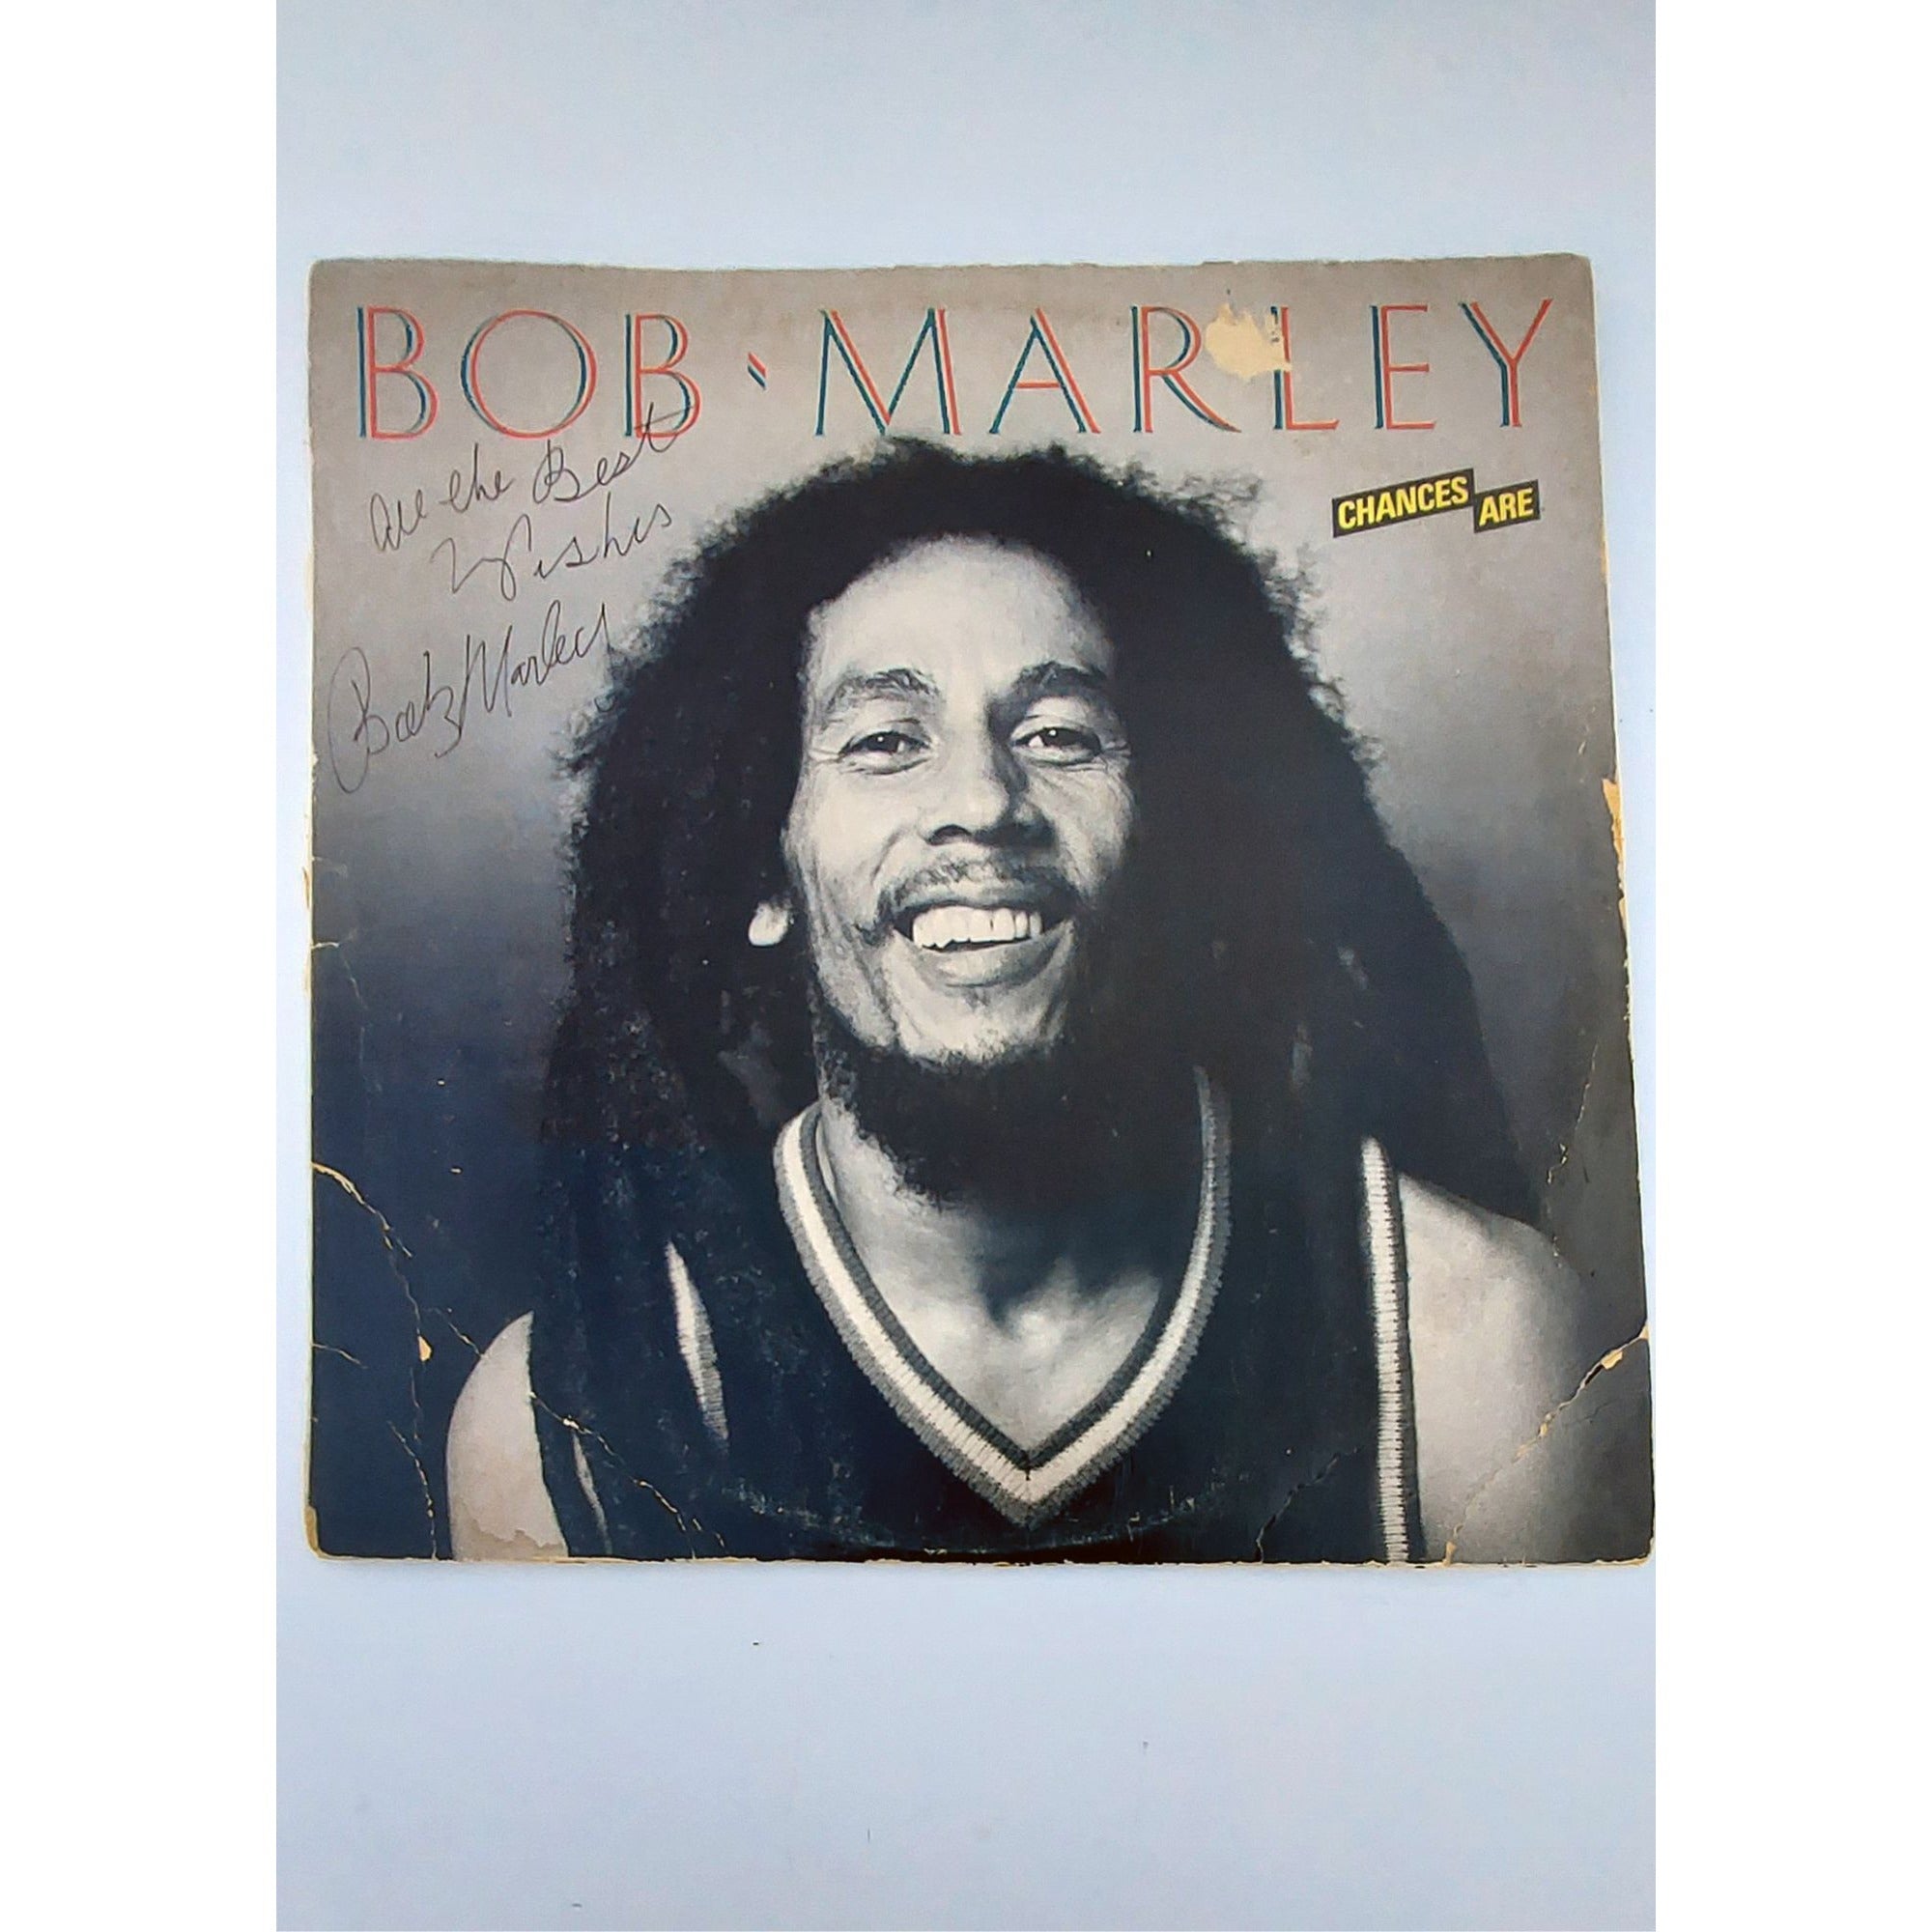 Bob Marley 'Chances Are' LP signed and inscribed 'all the best wishes'